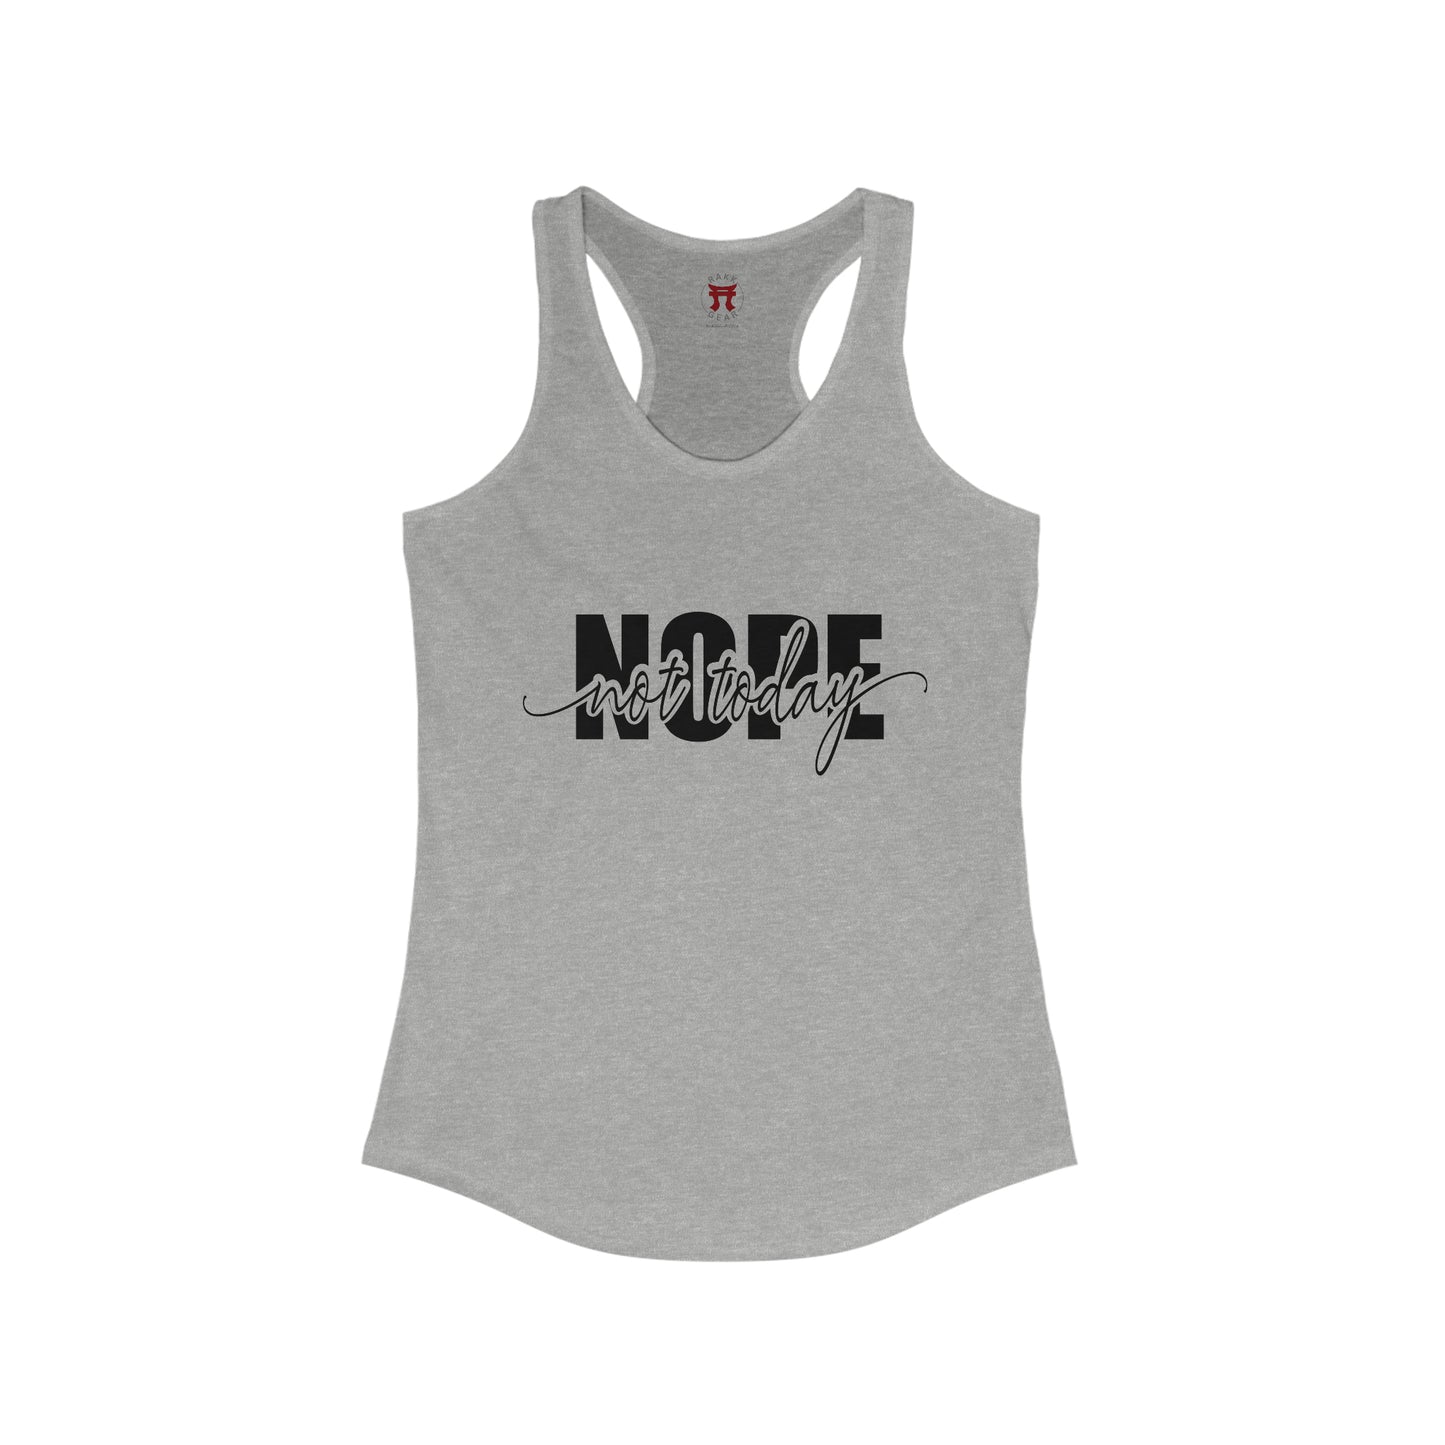 Rakkgear Women's Athletic Heather Tank Top with 'Nope Not Today' slogan on the front, featuring the Rakkgear logo on the upper inner back.